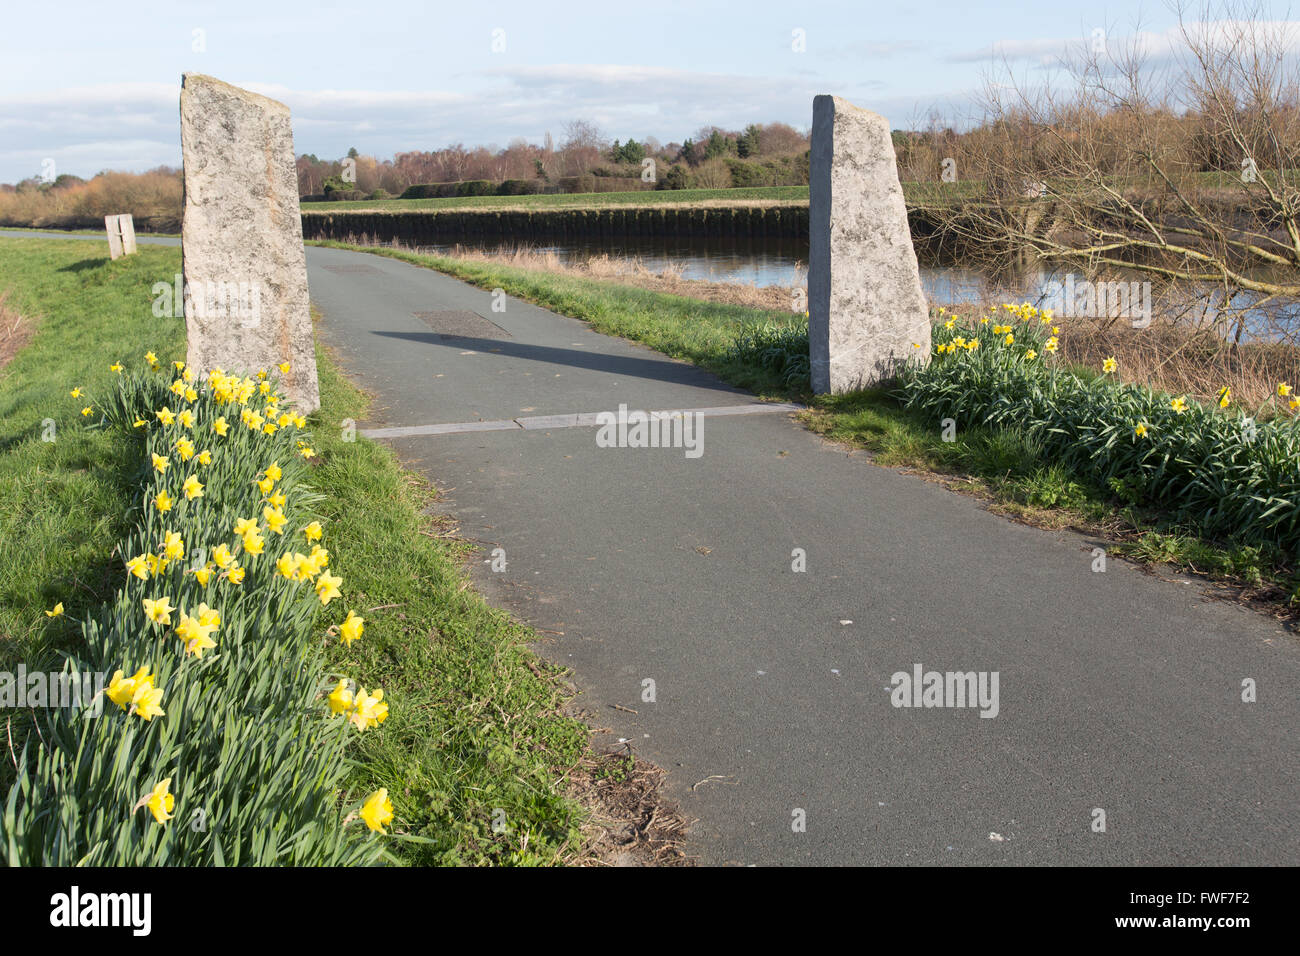 The Wales Coastal Path in North Wales. Picturesque spring view of the end (or start) of the Wales Coastal Path at Chester. Stock Photo